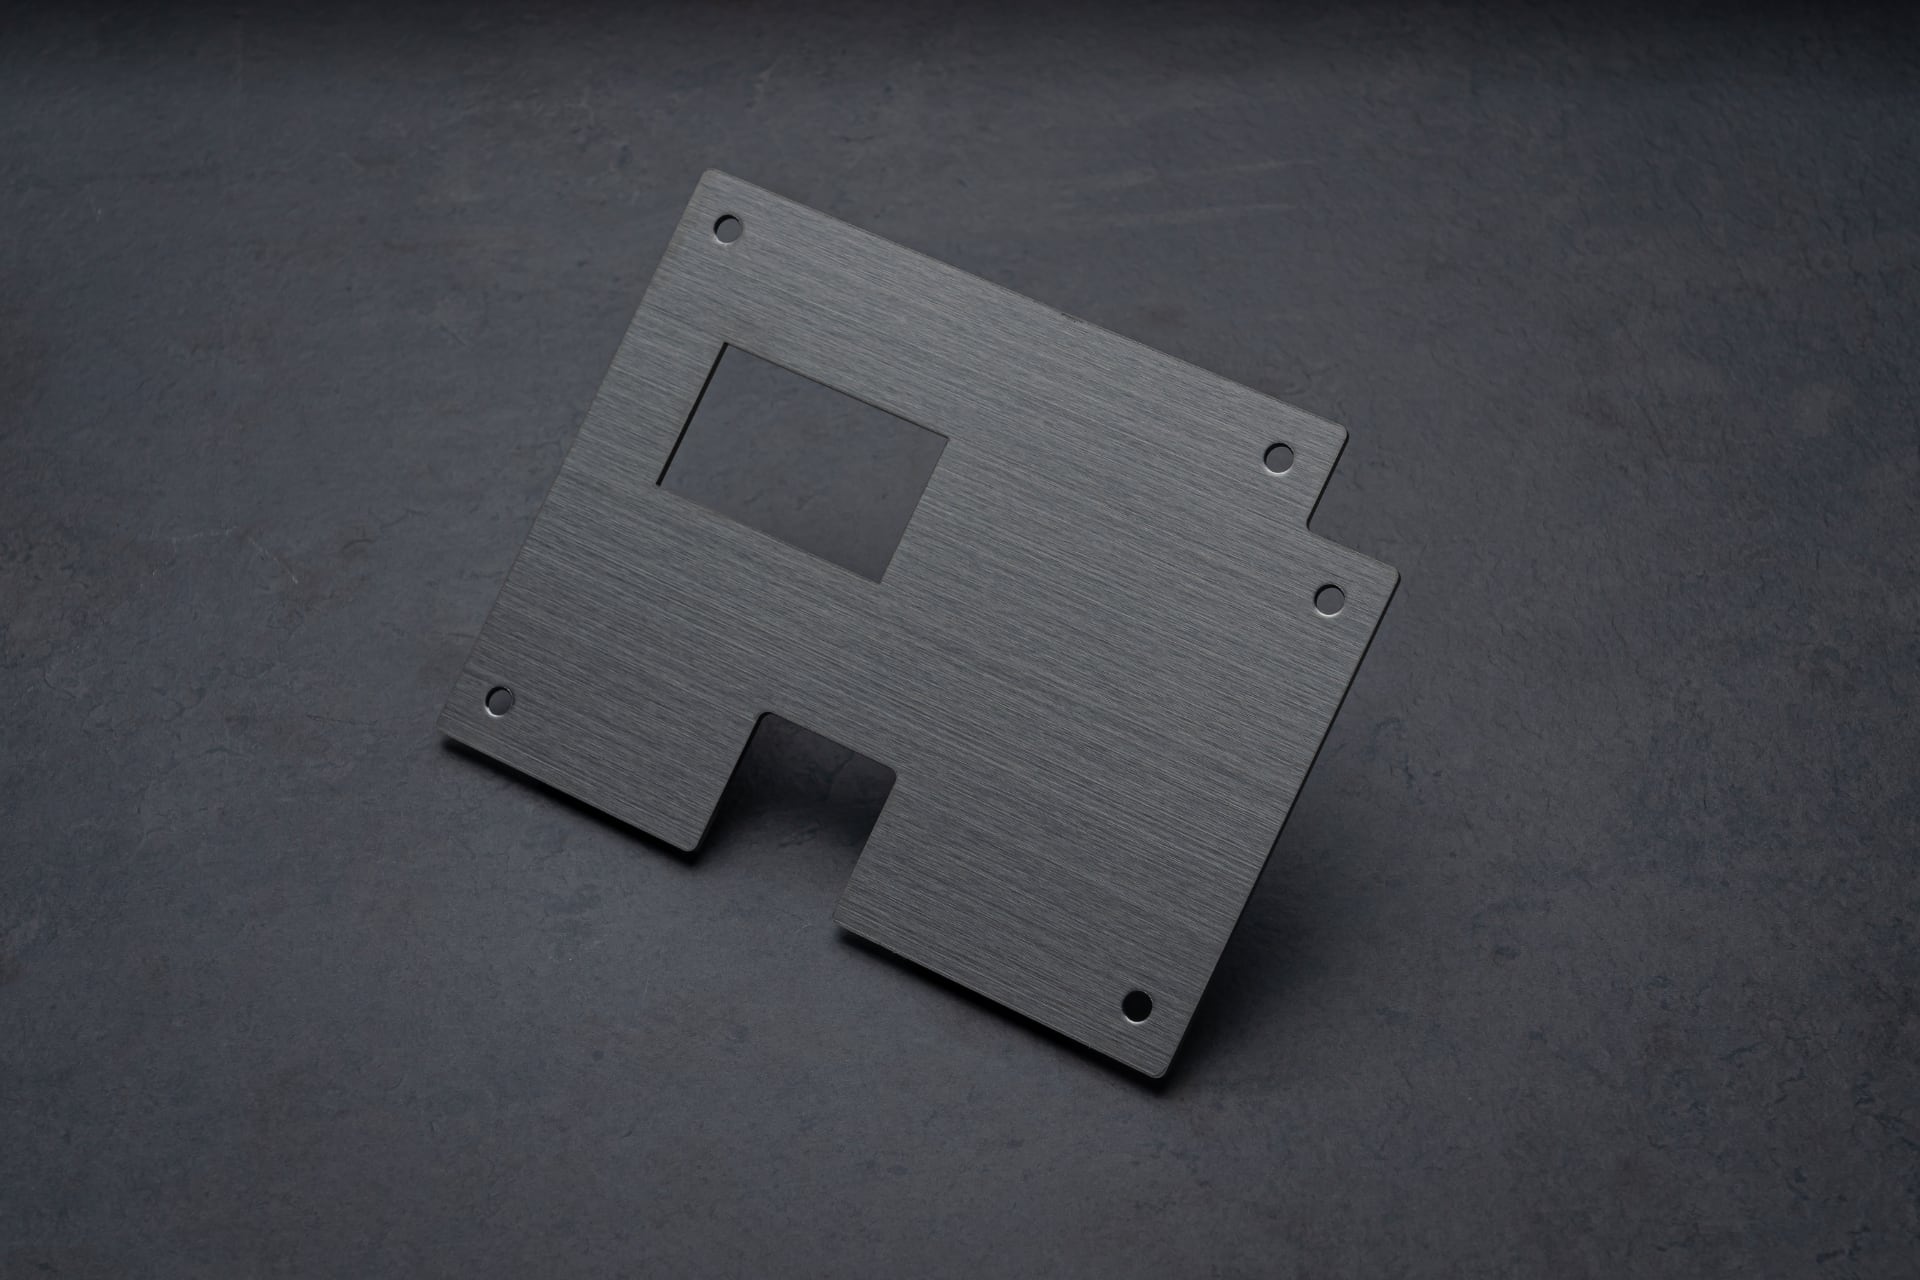 Example of a sheet metal part with a surface treatment that was produced with meviy.